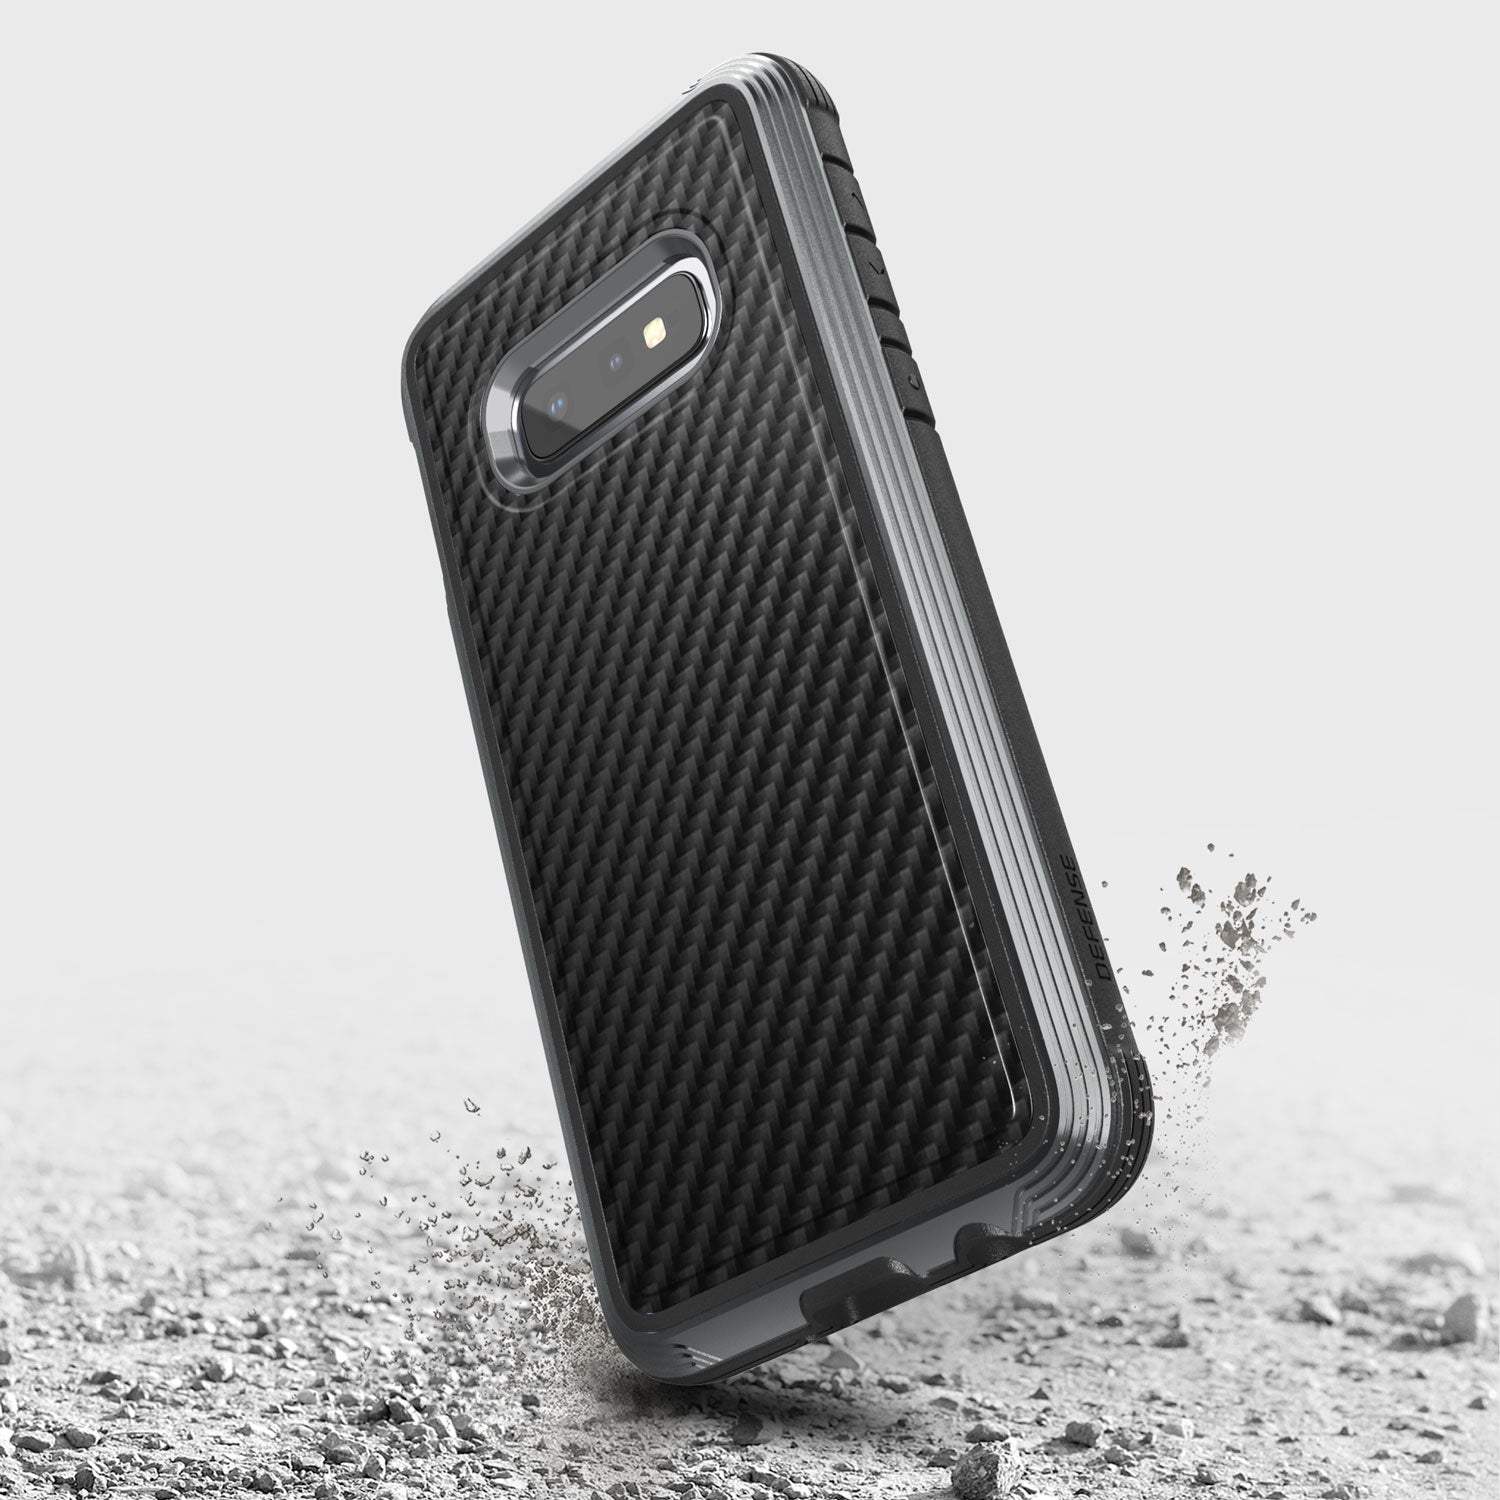 Raptic Lux Black Carbon Fiber Samsung Galaxy S10e case, offering ultimate protection with the Raptic Lux design.